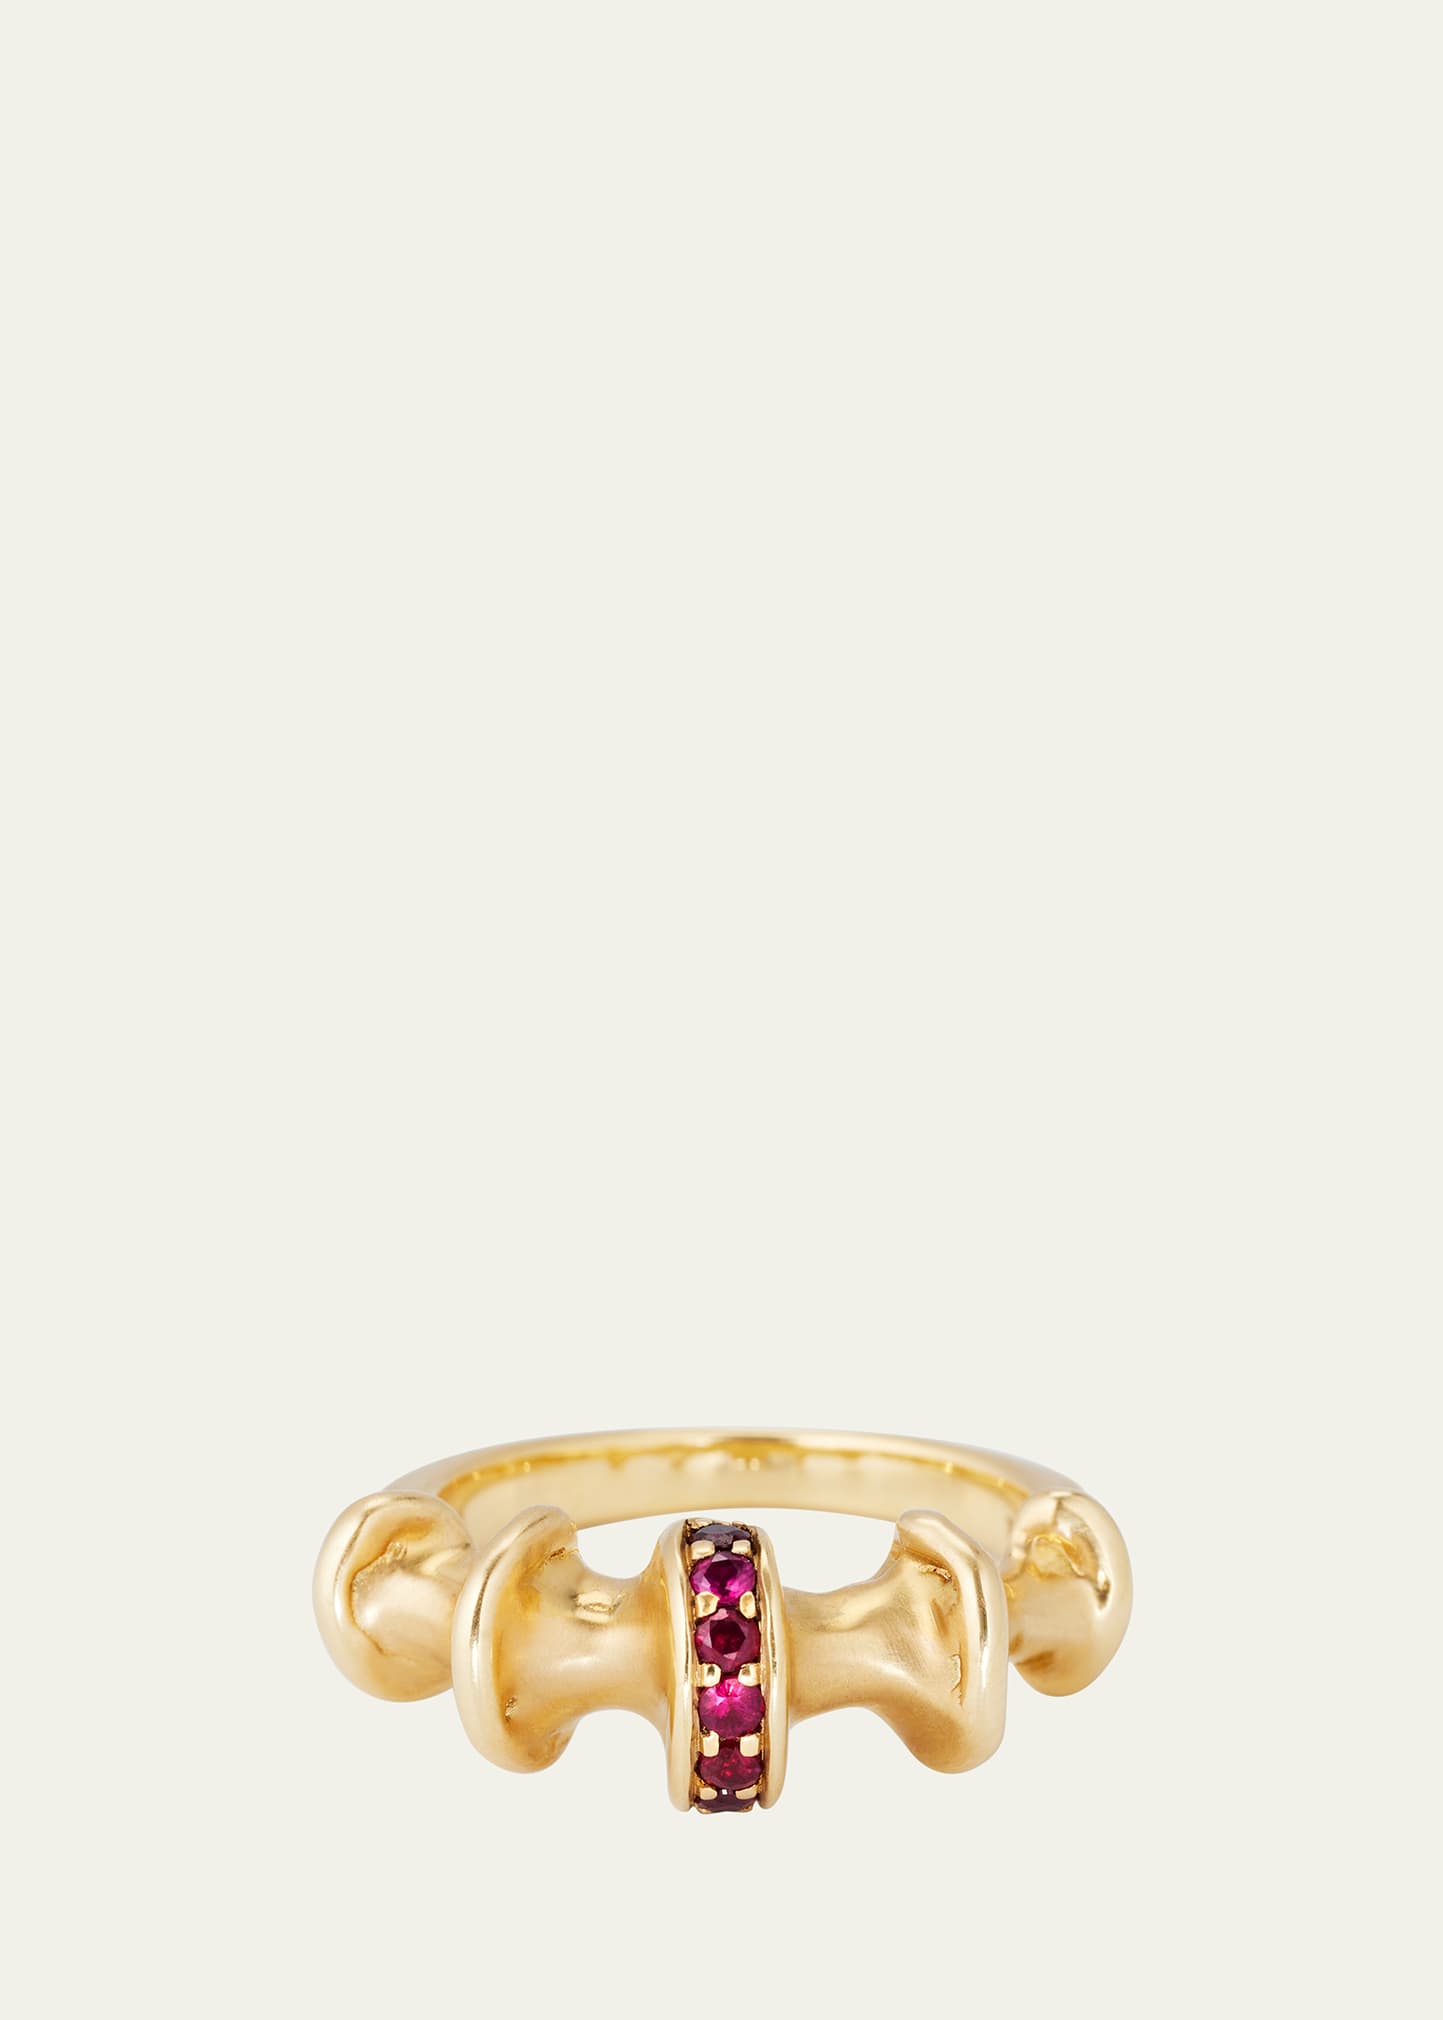 Yellow Gold Chrona Band Ring With Rubies, Size 6.5